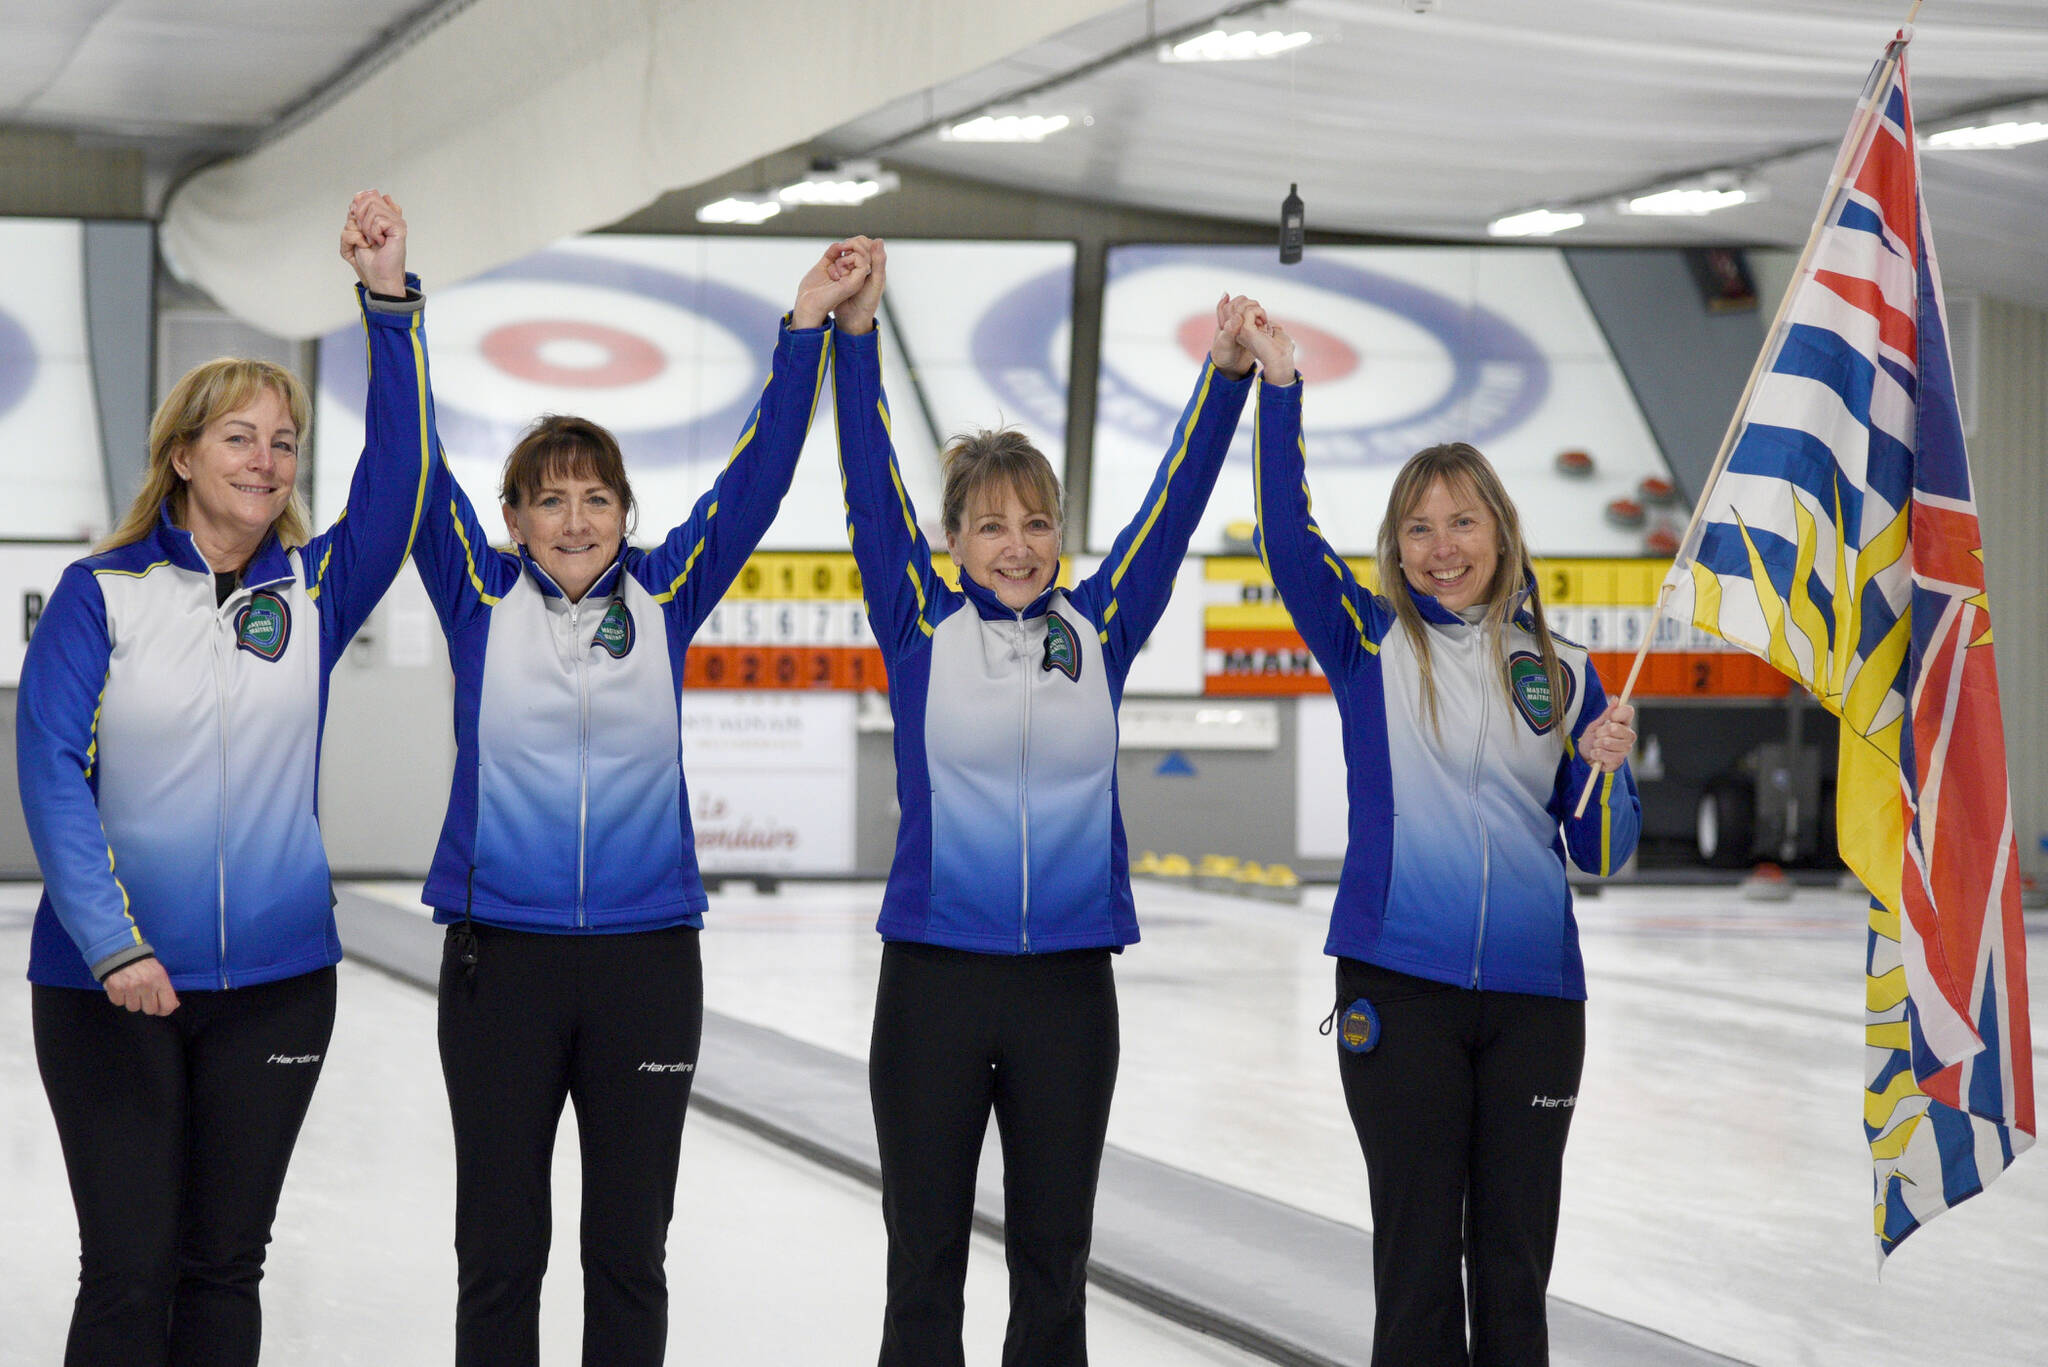 Penny Shantz, left, Cindy Curtain, Danielle Shaughnessy and Donna Mychaluk won in the Canadian women’s masters curling. This is the third consecutive year the BC team has won at this level. (Contributed)